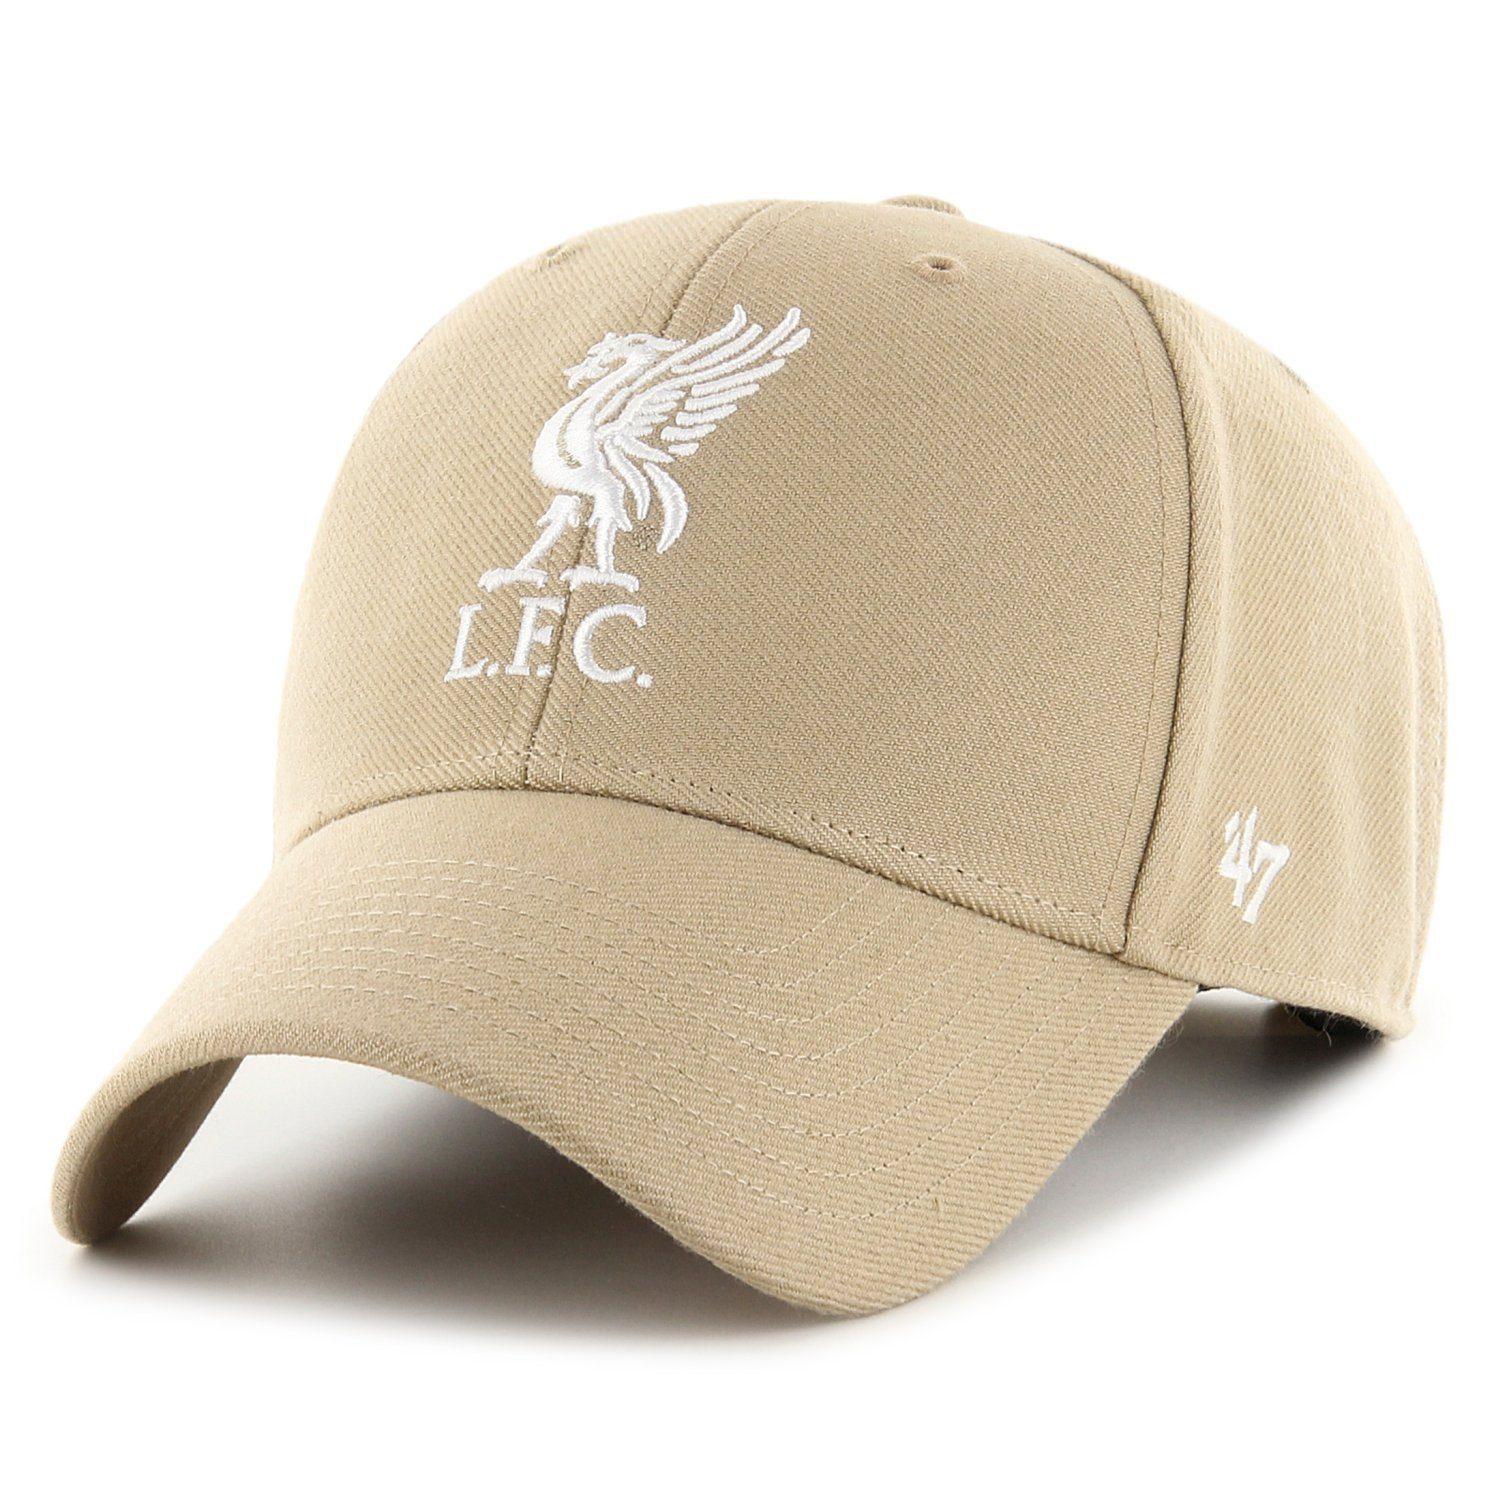 x27;47 Brand Trucker Cap FC Relaxed Fit Liverpool